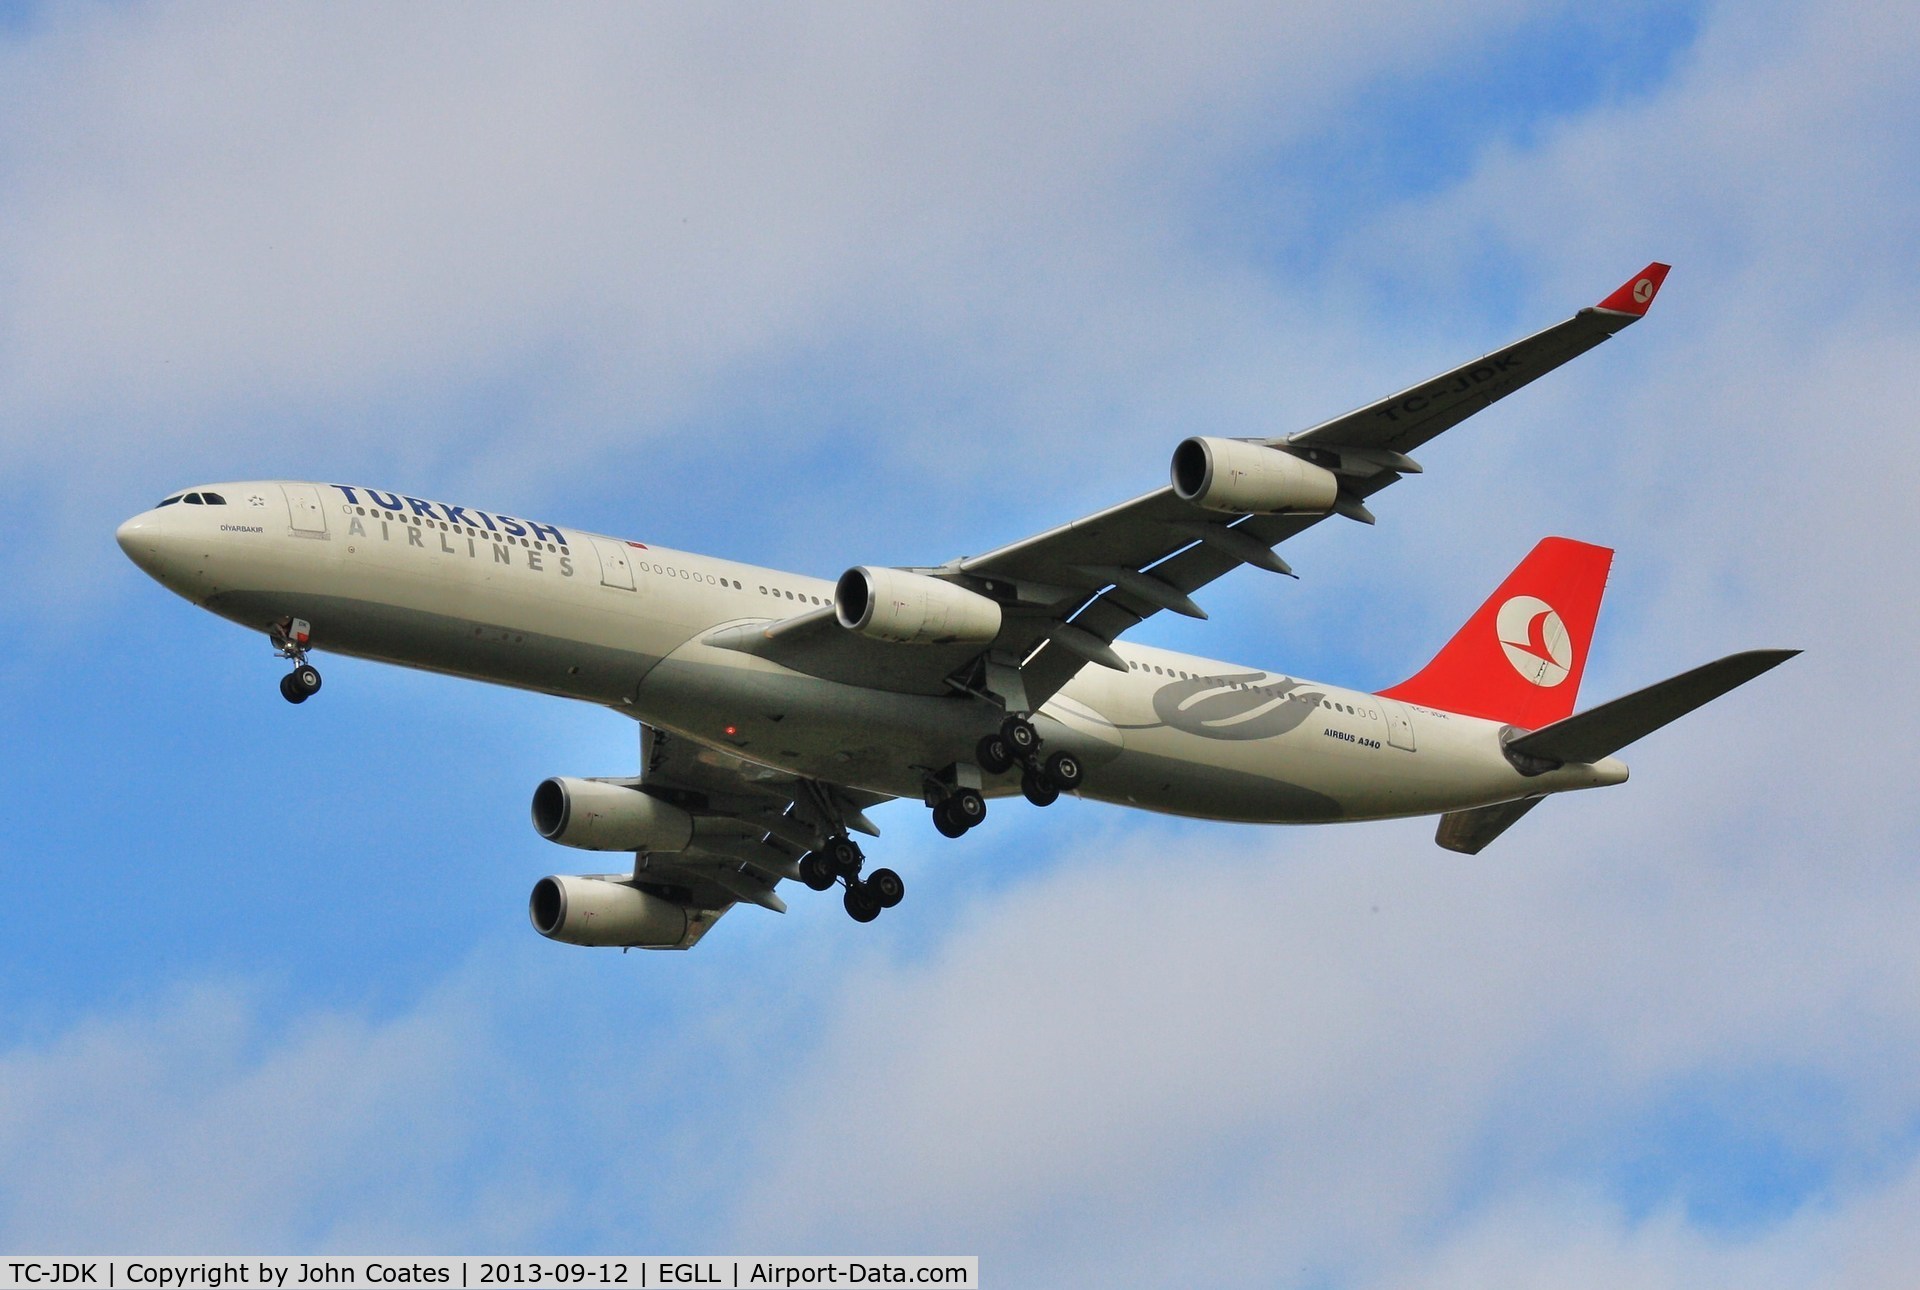 TC-JDK, 1993 Airbus A340-311 C/N 025, On approach to 27R.